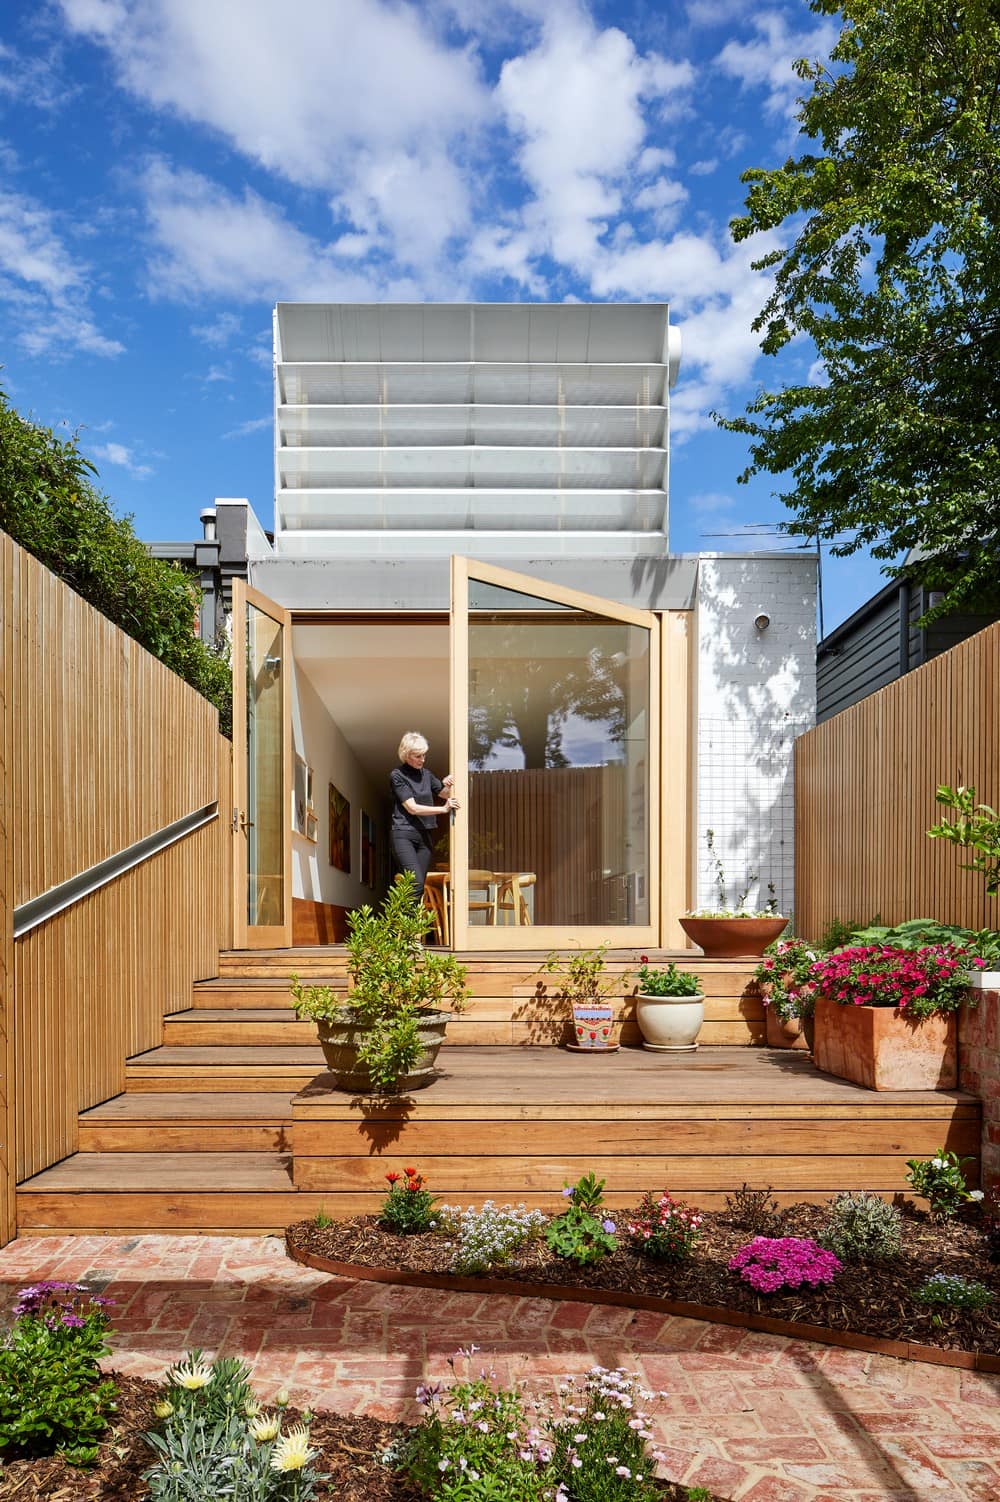 Hood House / Mihaly Slocombe